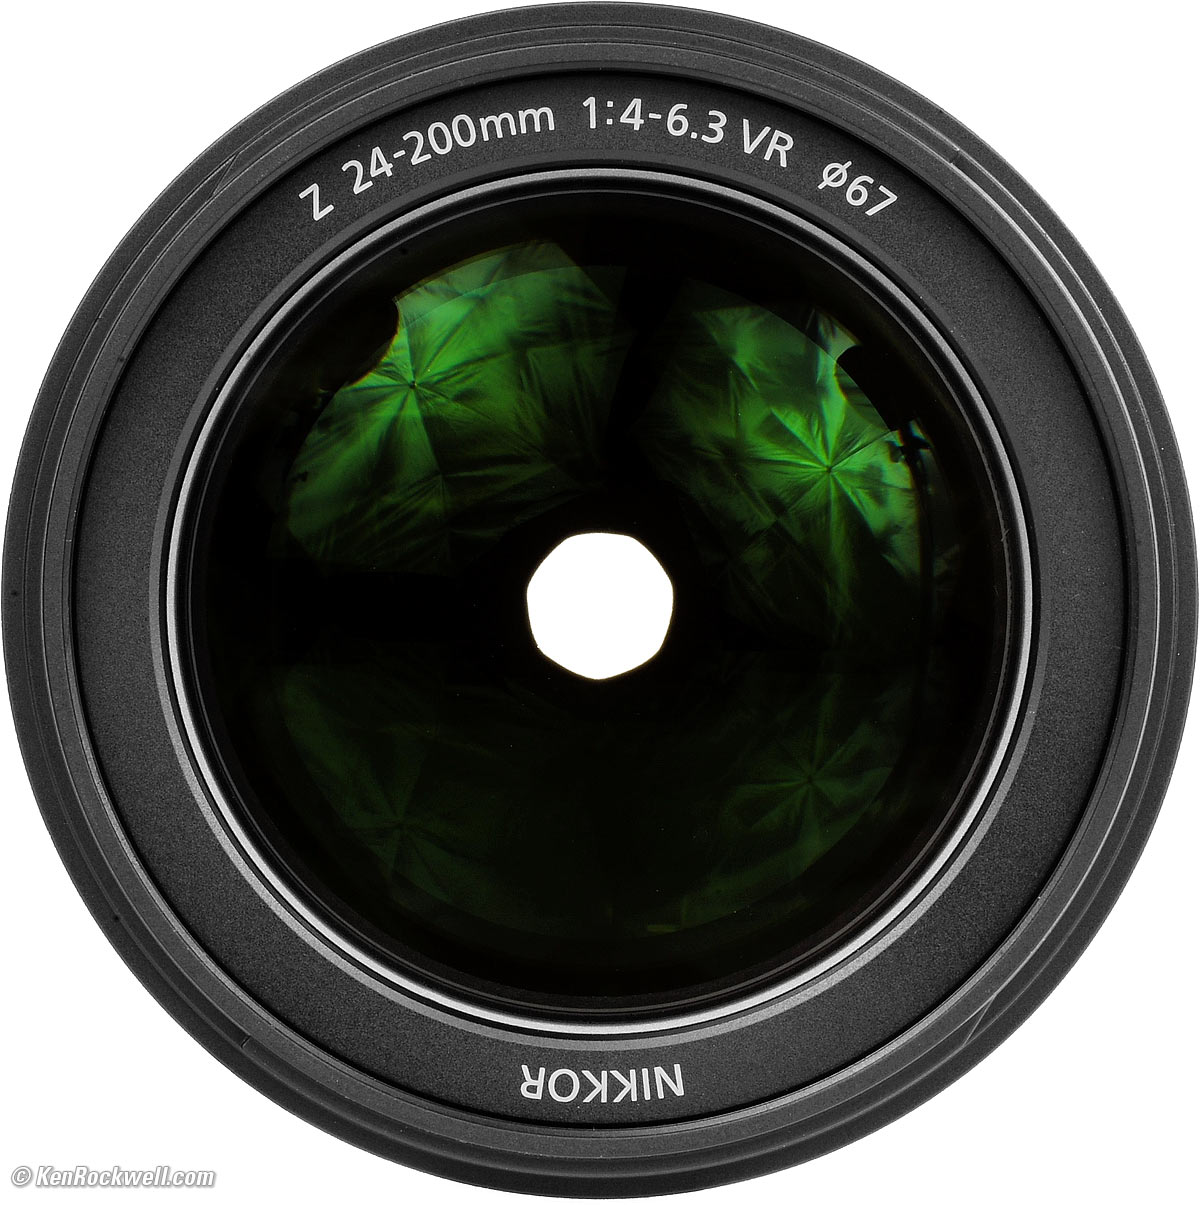 Sample VR Review Rockwell 24‑200mm Z Nikon Images & Ken by